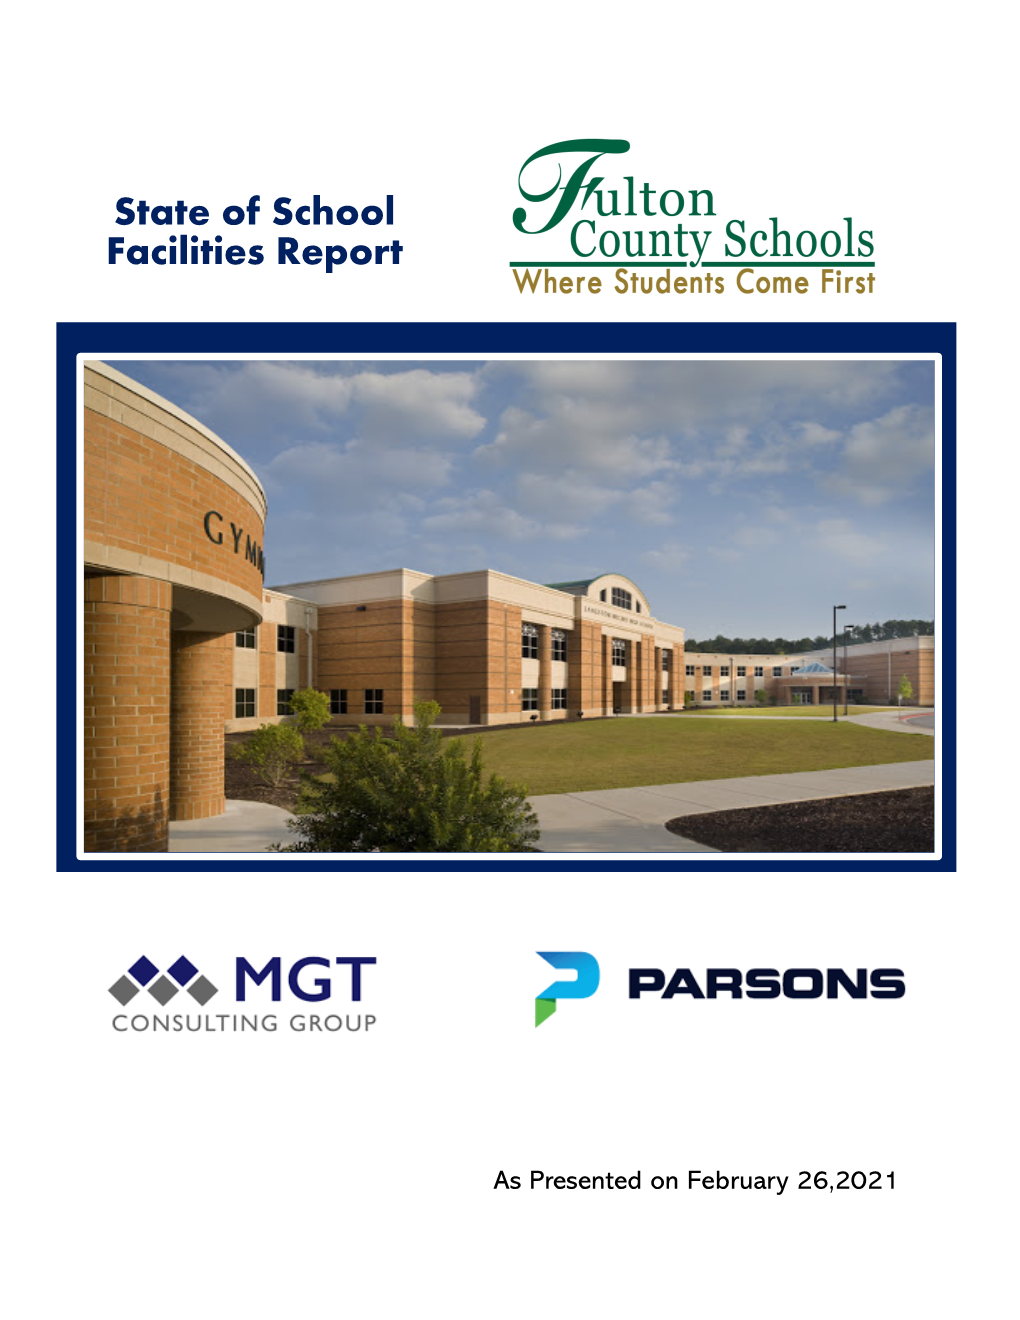 State of School Facilities Report